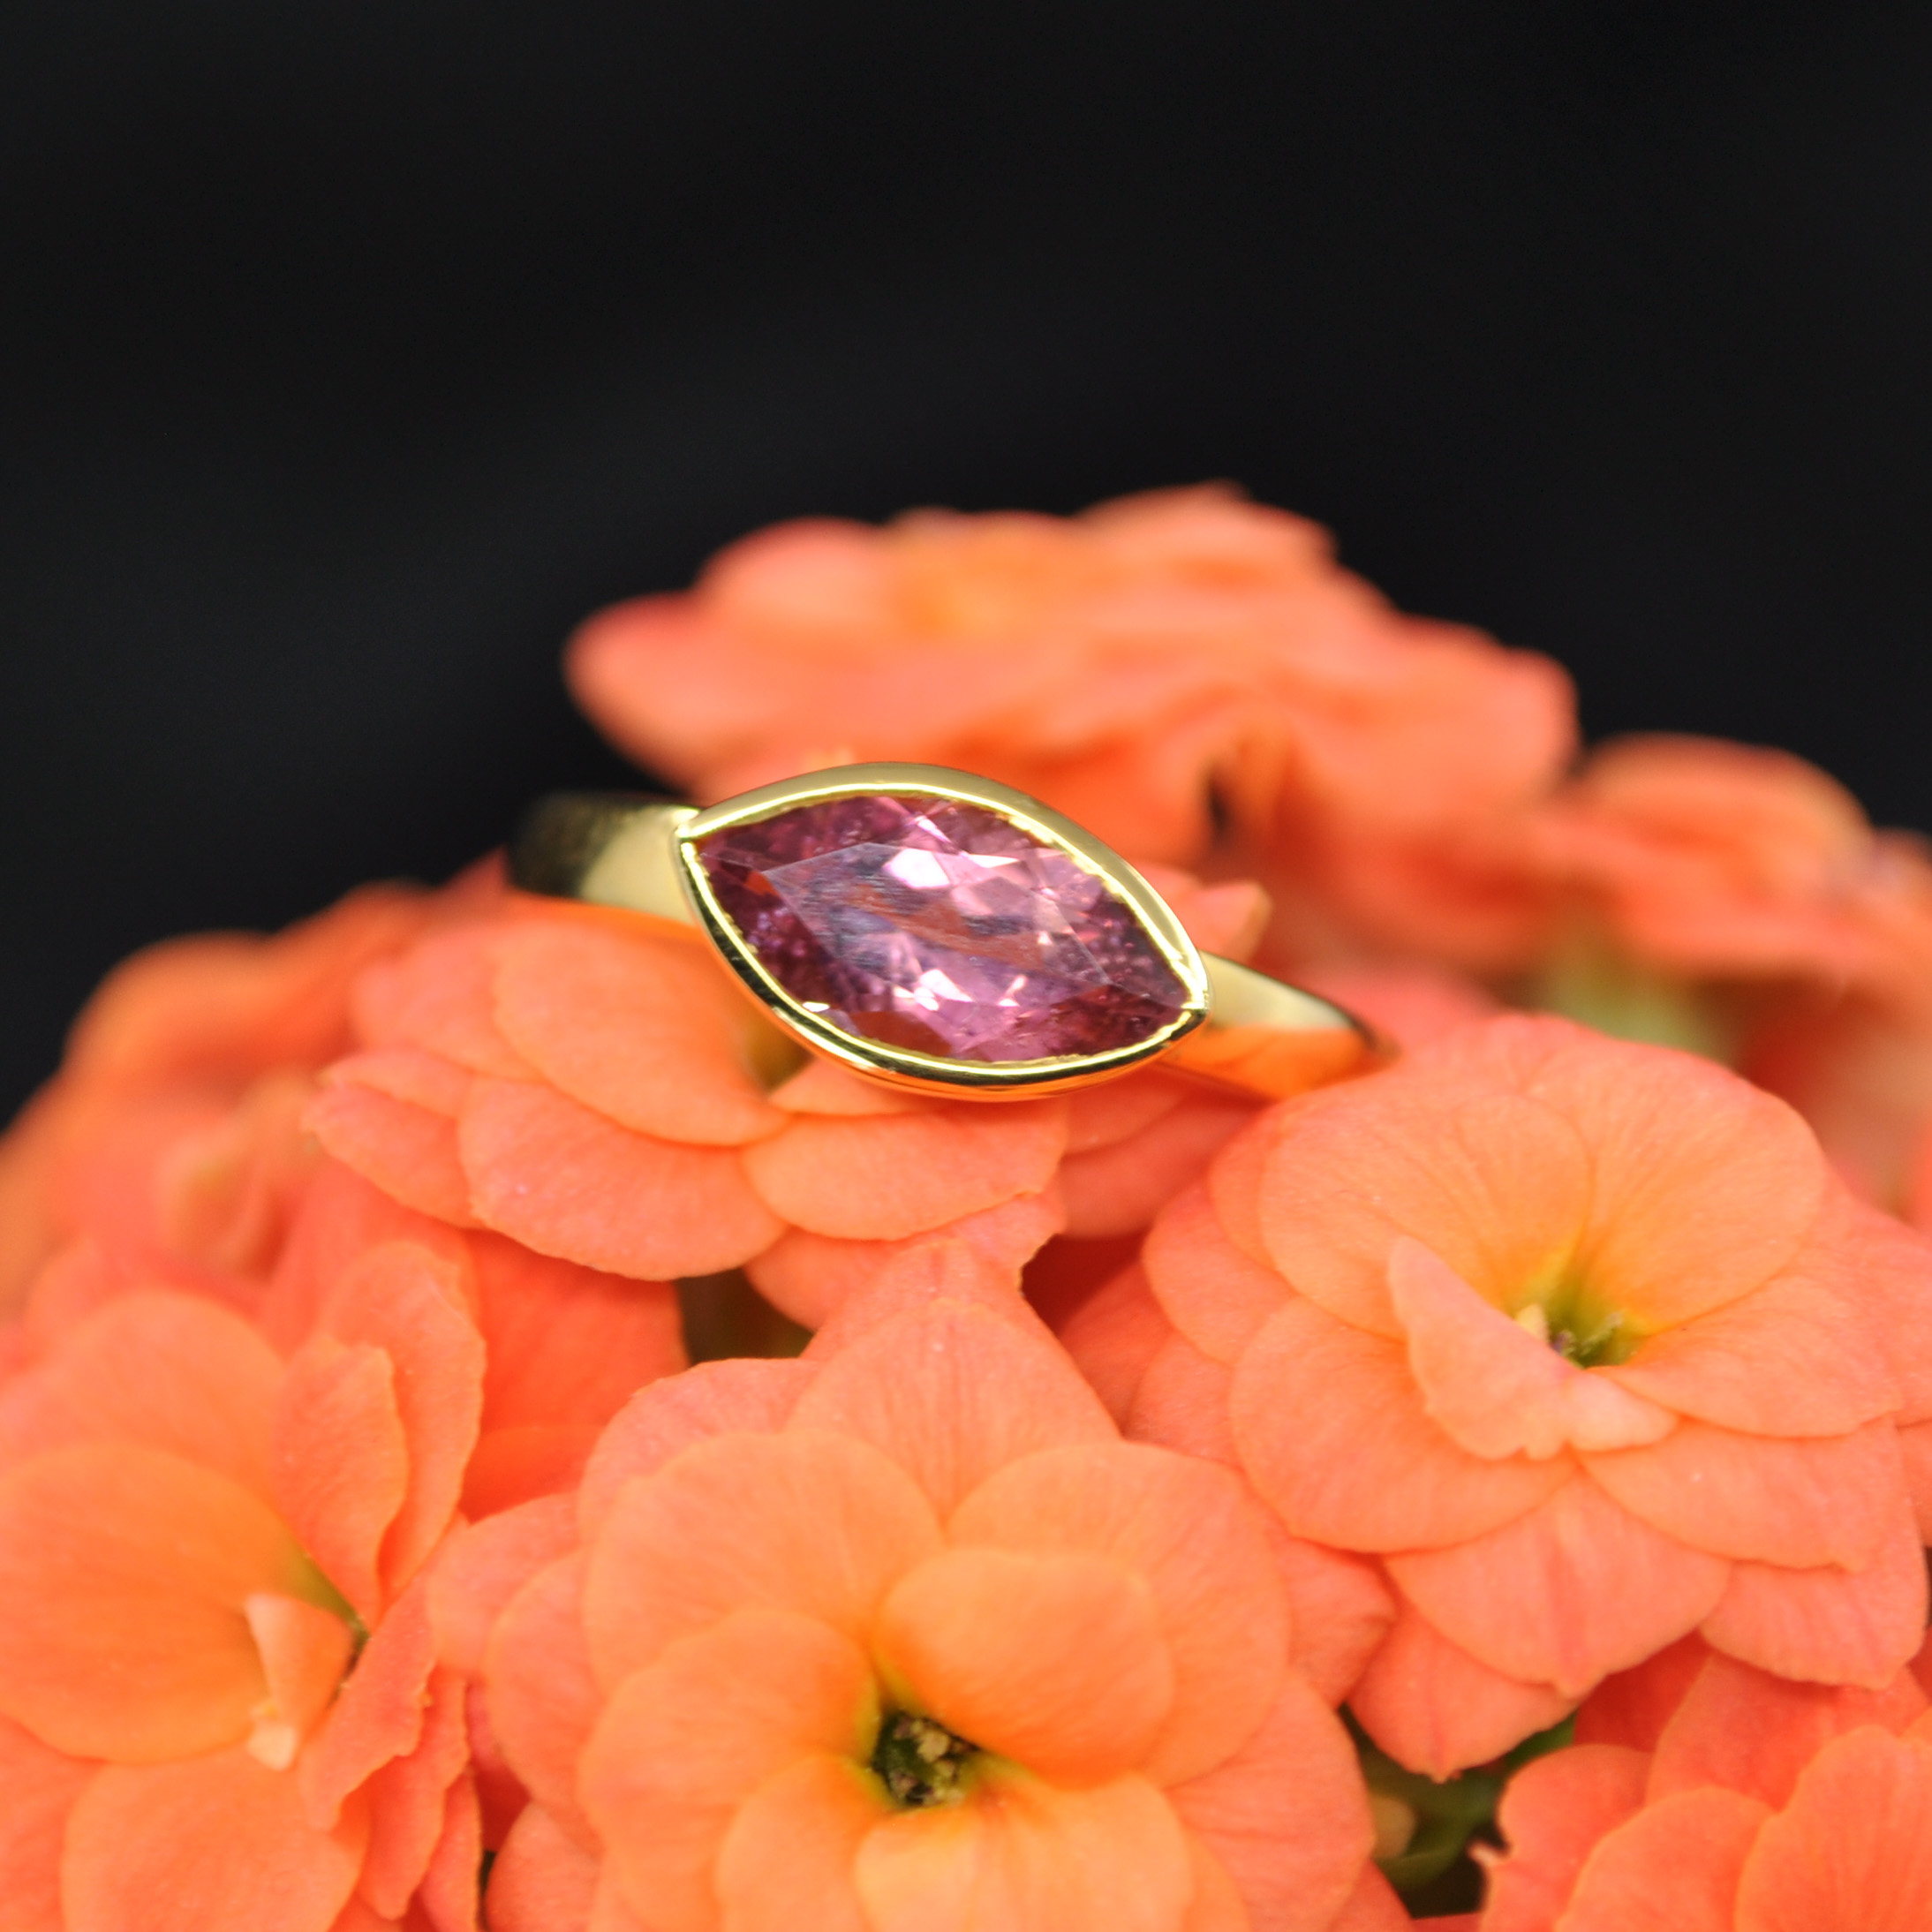 CR3568 Marquise Pink Maine Tourmaline Ring 14KY